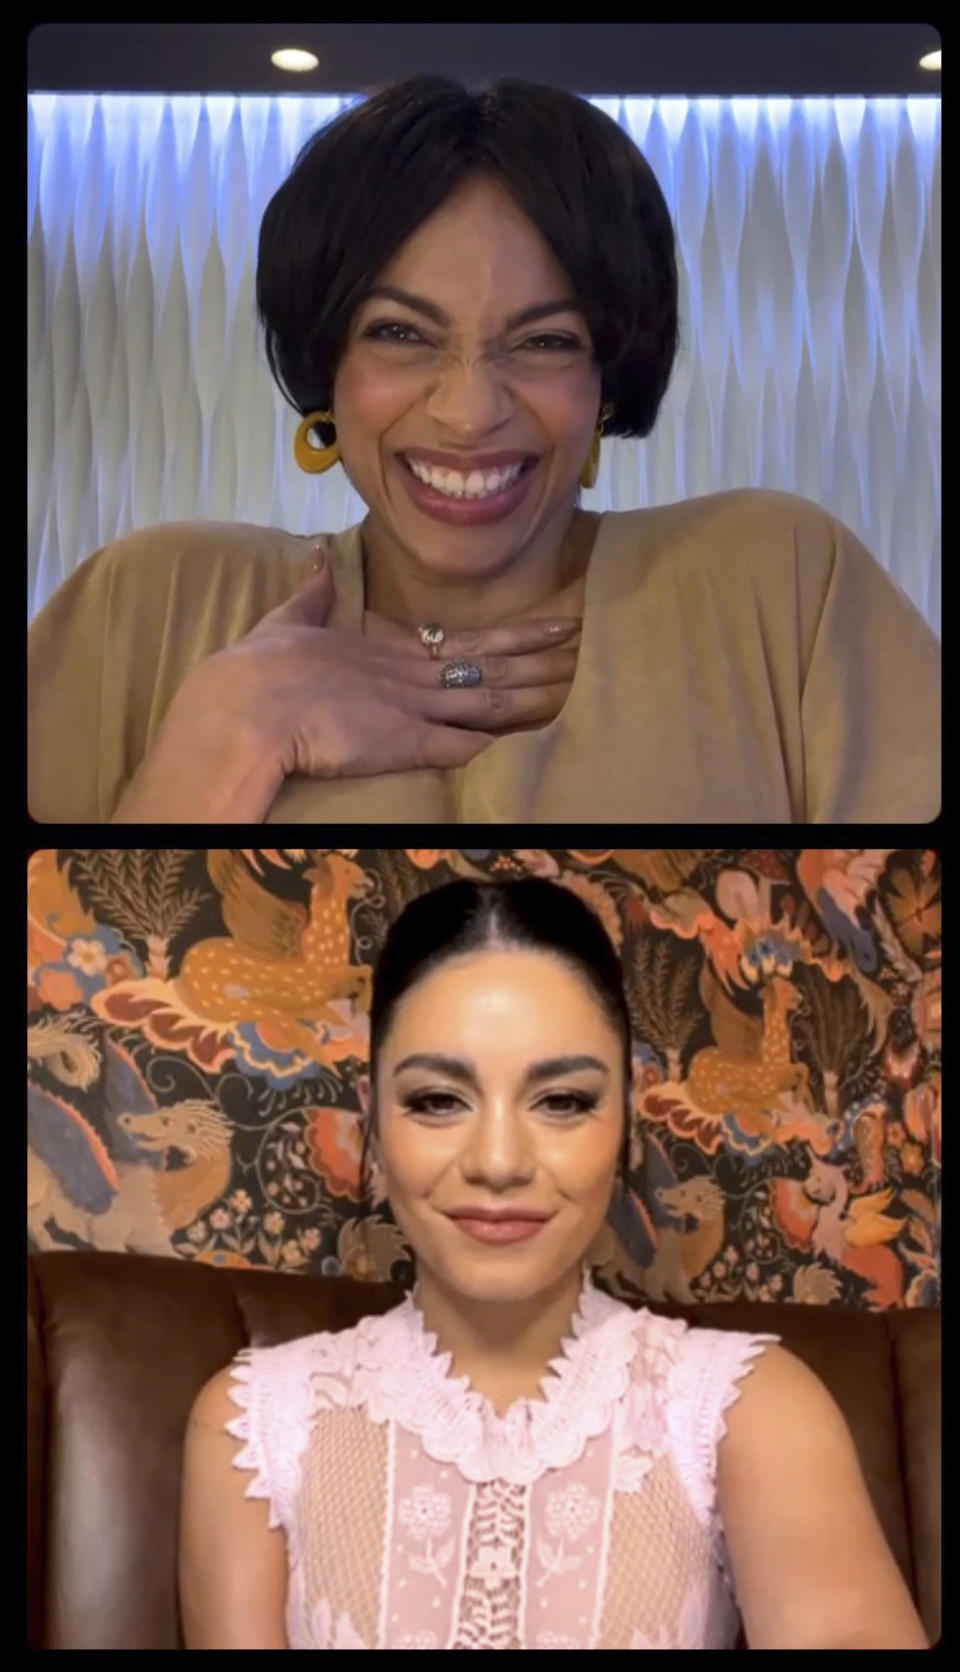 In this video grab issued Wednesday, Jan. 12, 2022 by the SAG Awards, Rosario Dawson, top, and Vanessa Hudgens, bottom, present the nominees for the 28th SAG Awards. This year's awards are scheduled for Feb. 27. (SAG Awards via AP)